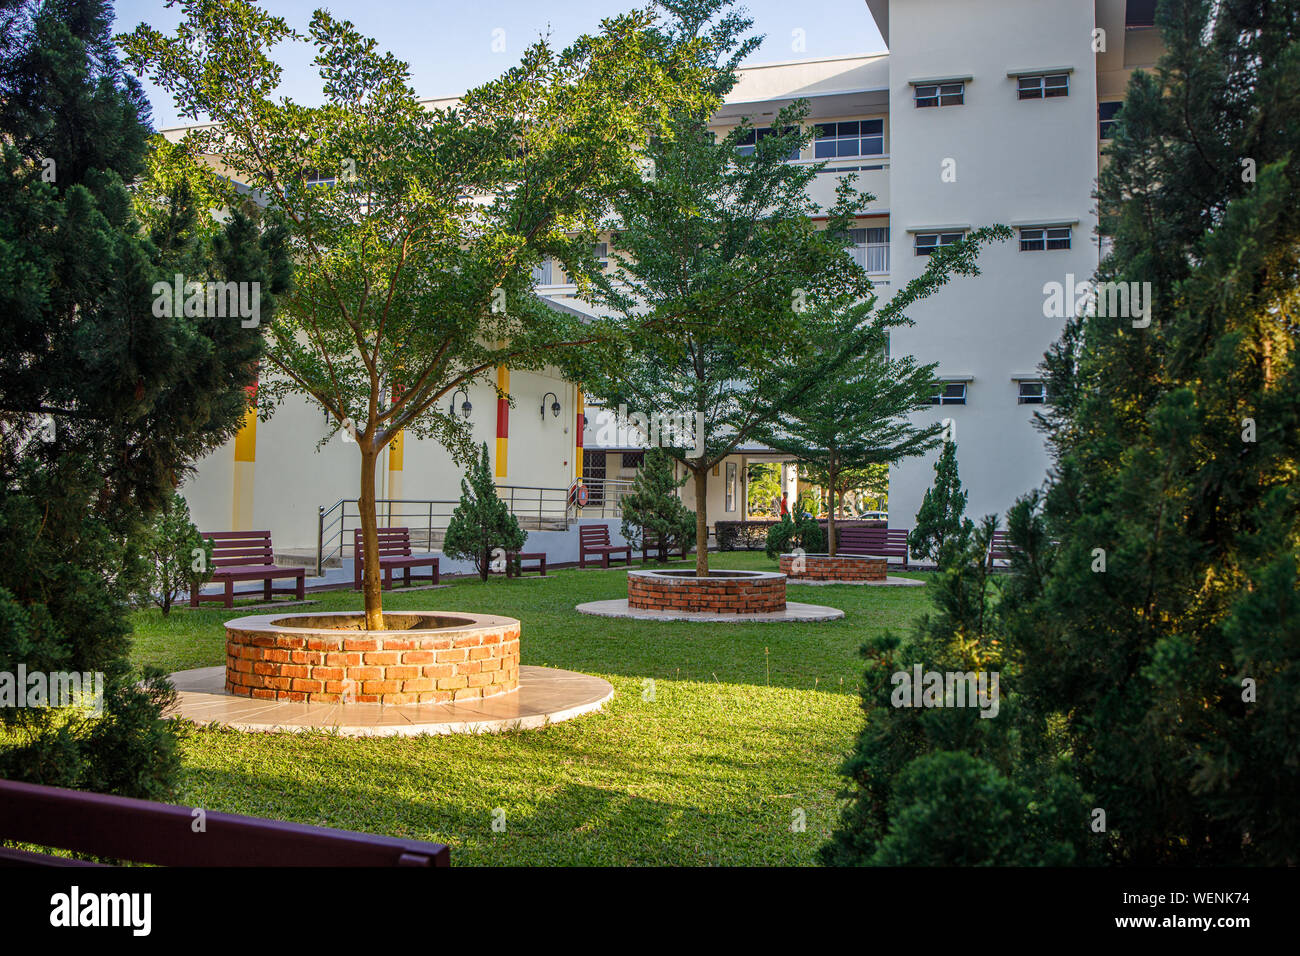 TAWAU, MALAYSIA - AUGUST 09, 2019: Views within the Sabah Chinese High School Compound in Tawau. Stock Photo